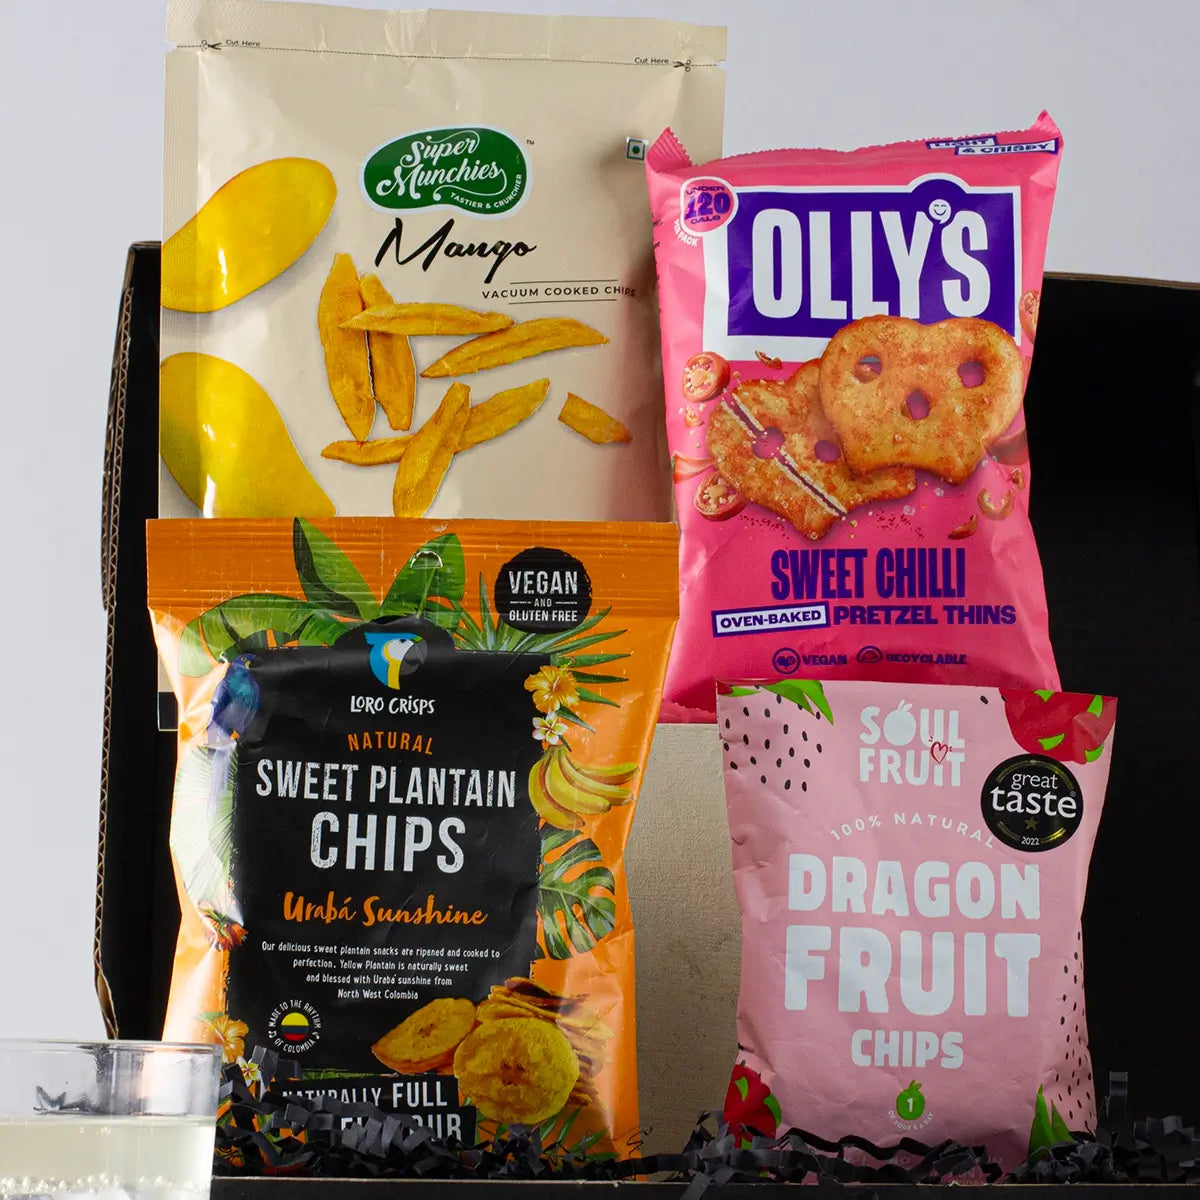 Passionfruit Martini Gift Set and Snacks